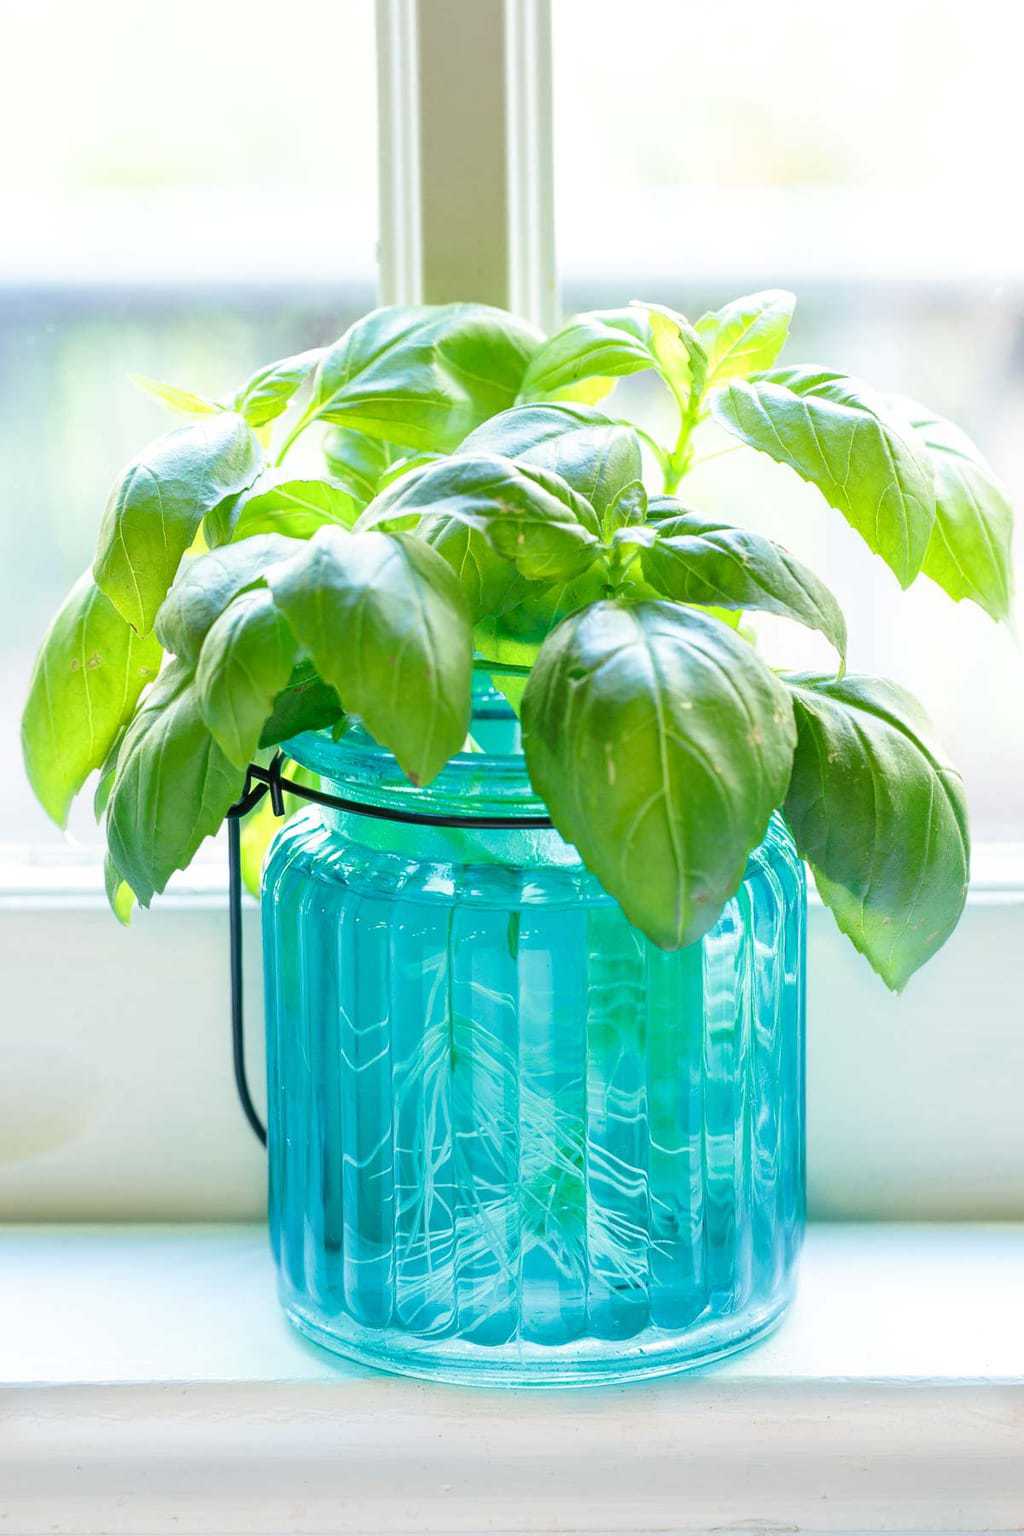 How To Root Basil From Cuttings The Cafe Sucre Farine,Sweet Chili Sauce Chicken